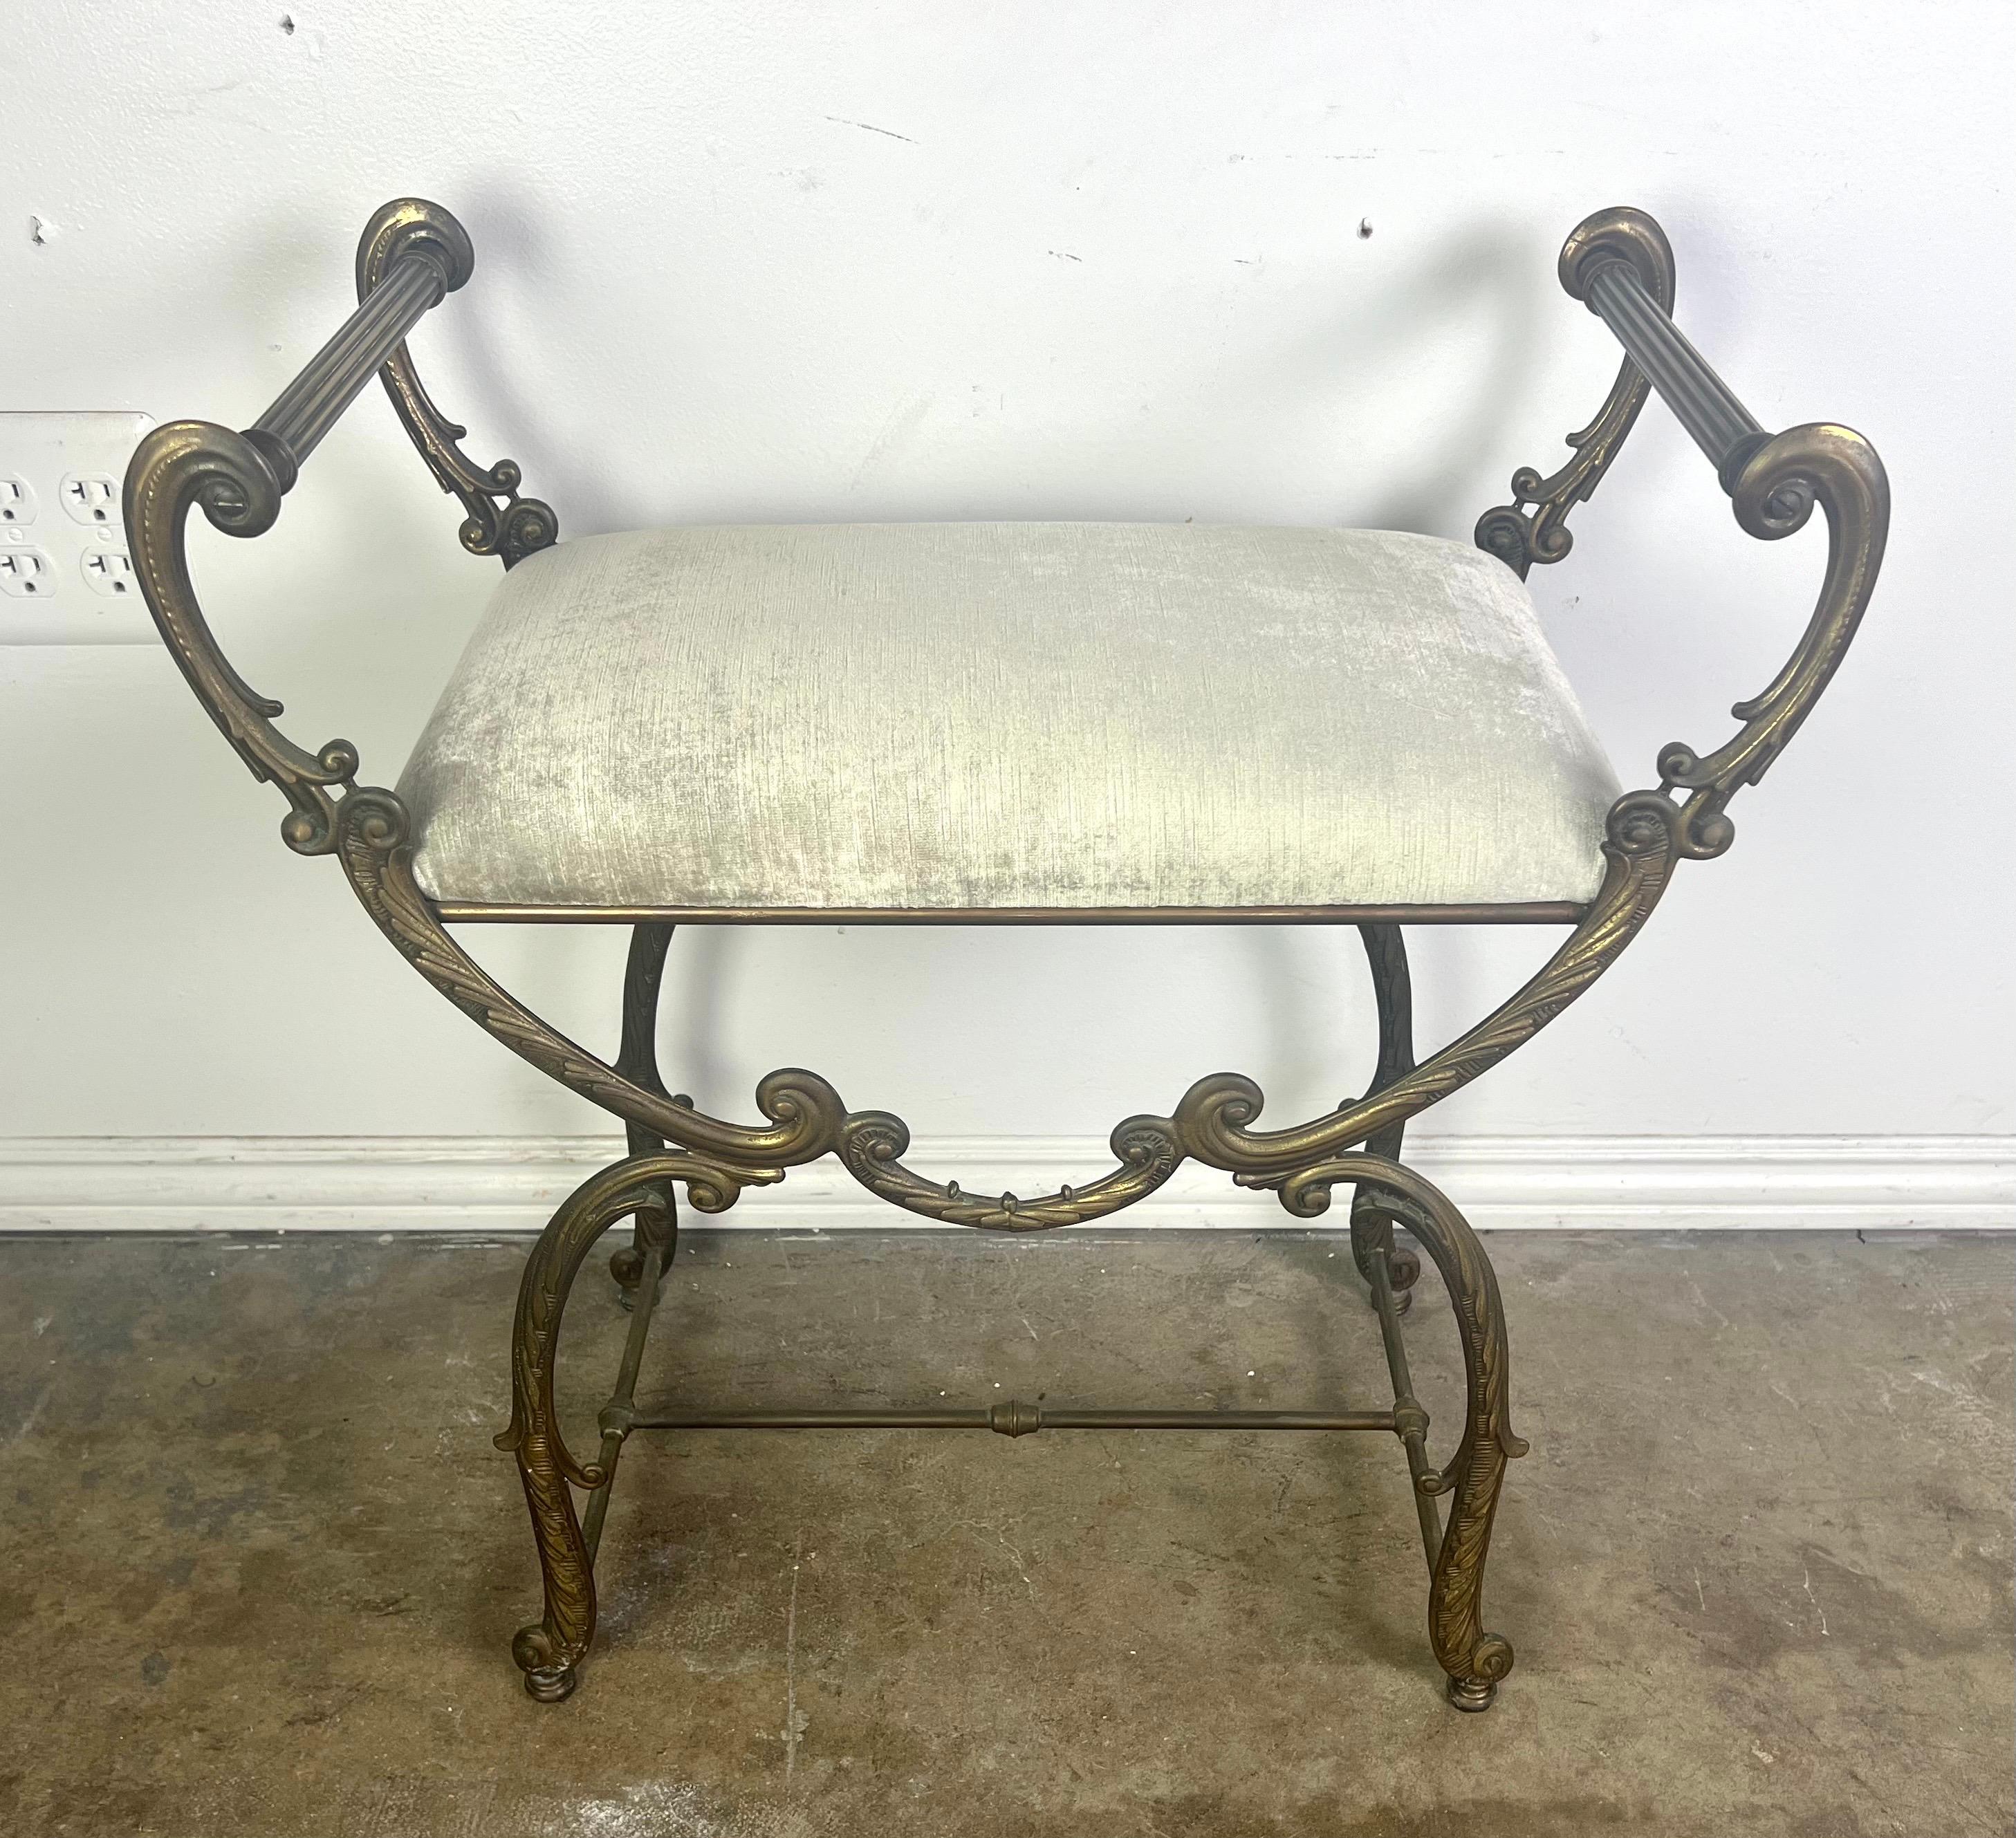 This French rococo style brass vanity bench features an ornate elegant design, showcasing a metal frame with intricate scrollwork and a luxurious antique finish.  The bench is upholstered in a silvery cream velvet that adds to it's opulent